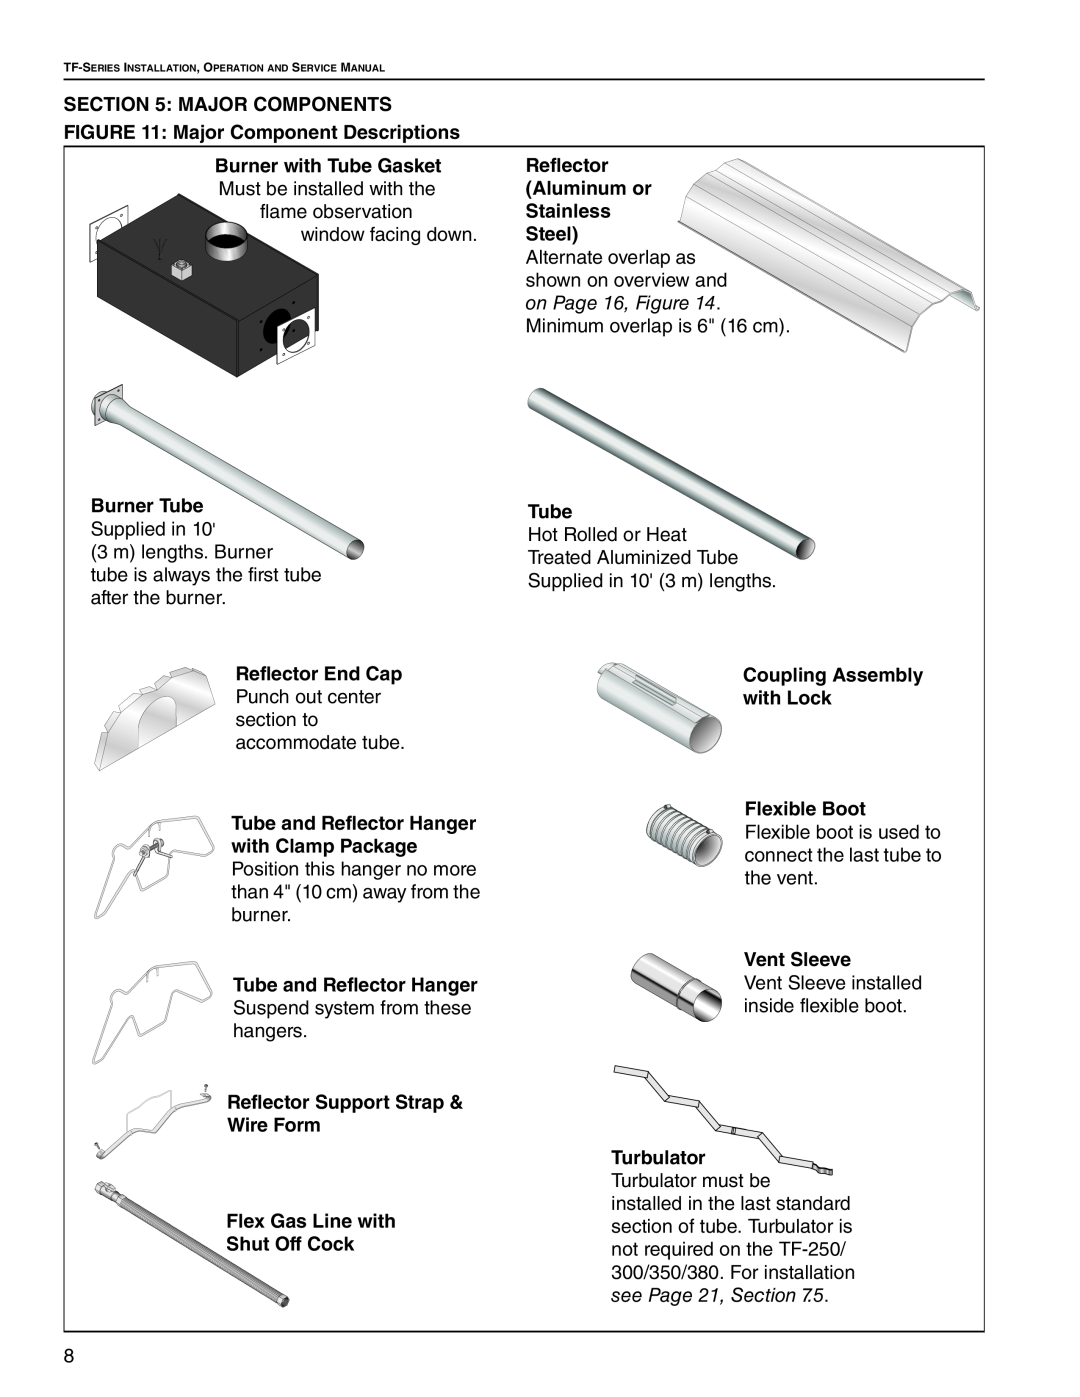 Roberts Gorden TF-350 Major Components, Major Component Descriptions, Reflector, Aluminum or, Stainless, Steel, Tube 